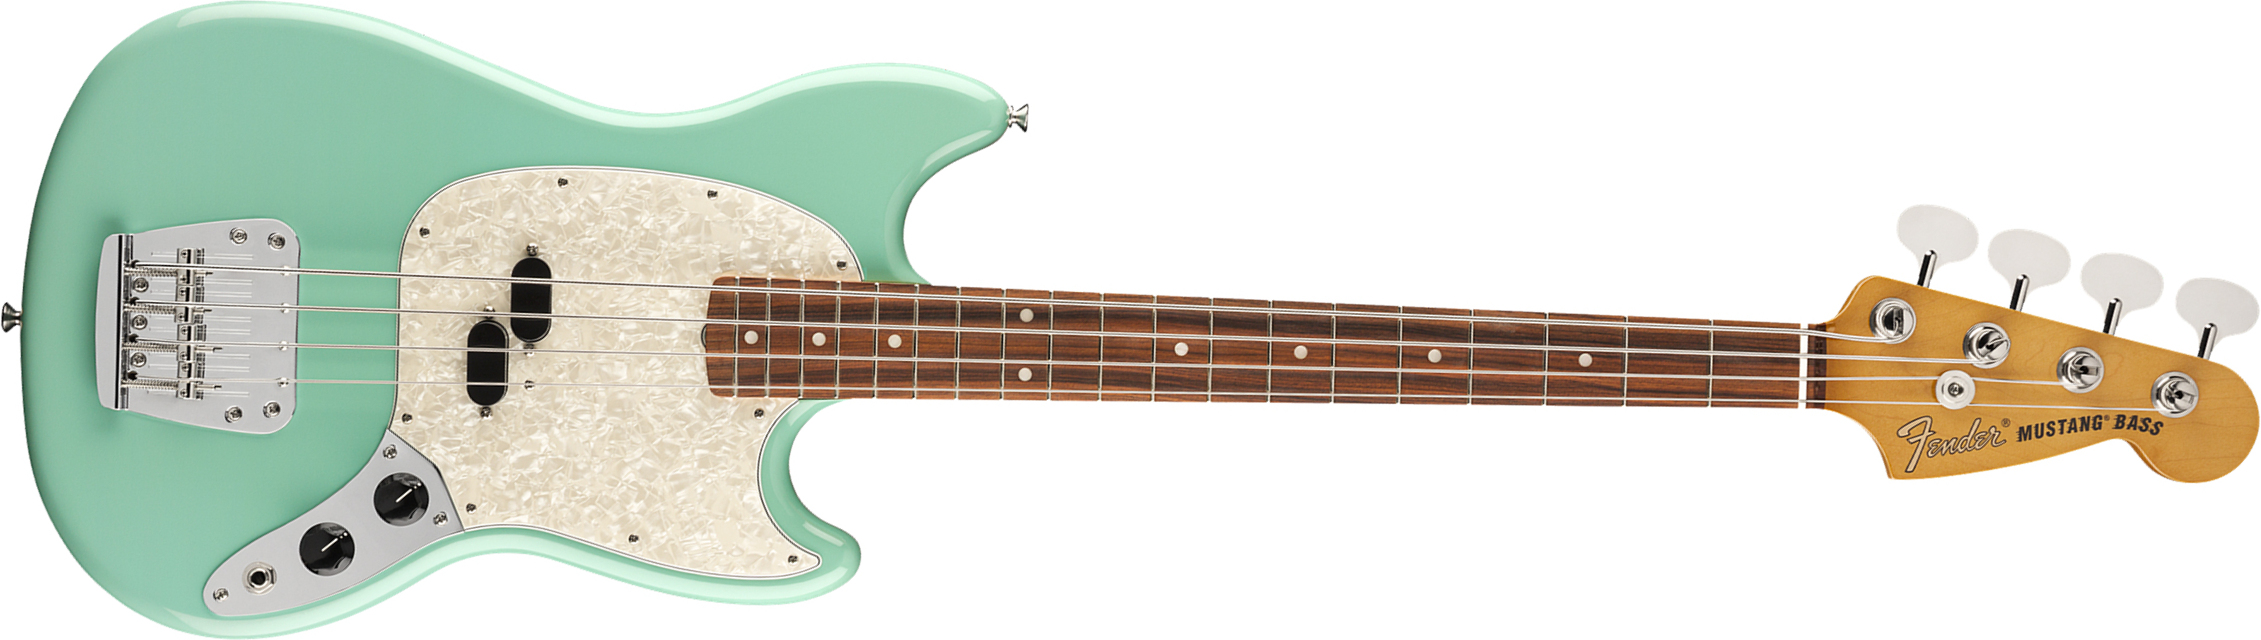 Fender Mustang Bass 60s Vintera Vintage Mex Pf - Seafoam Green - Electric bass for kids - Main picture